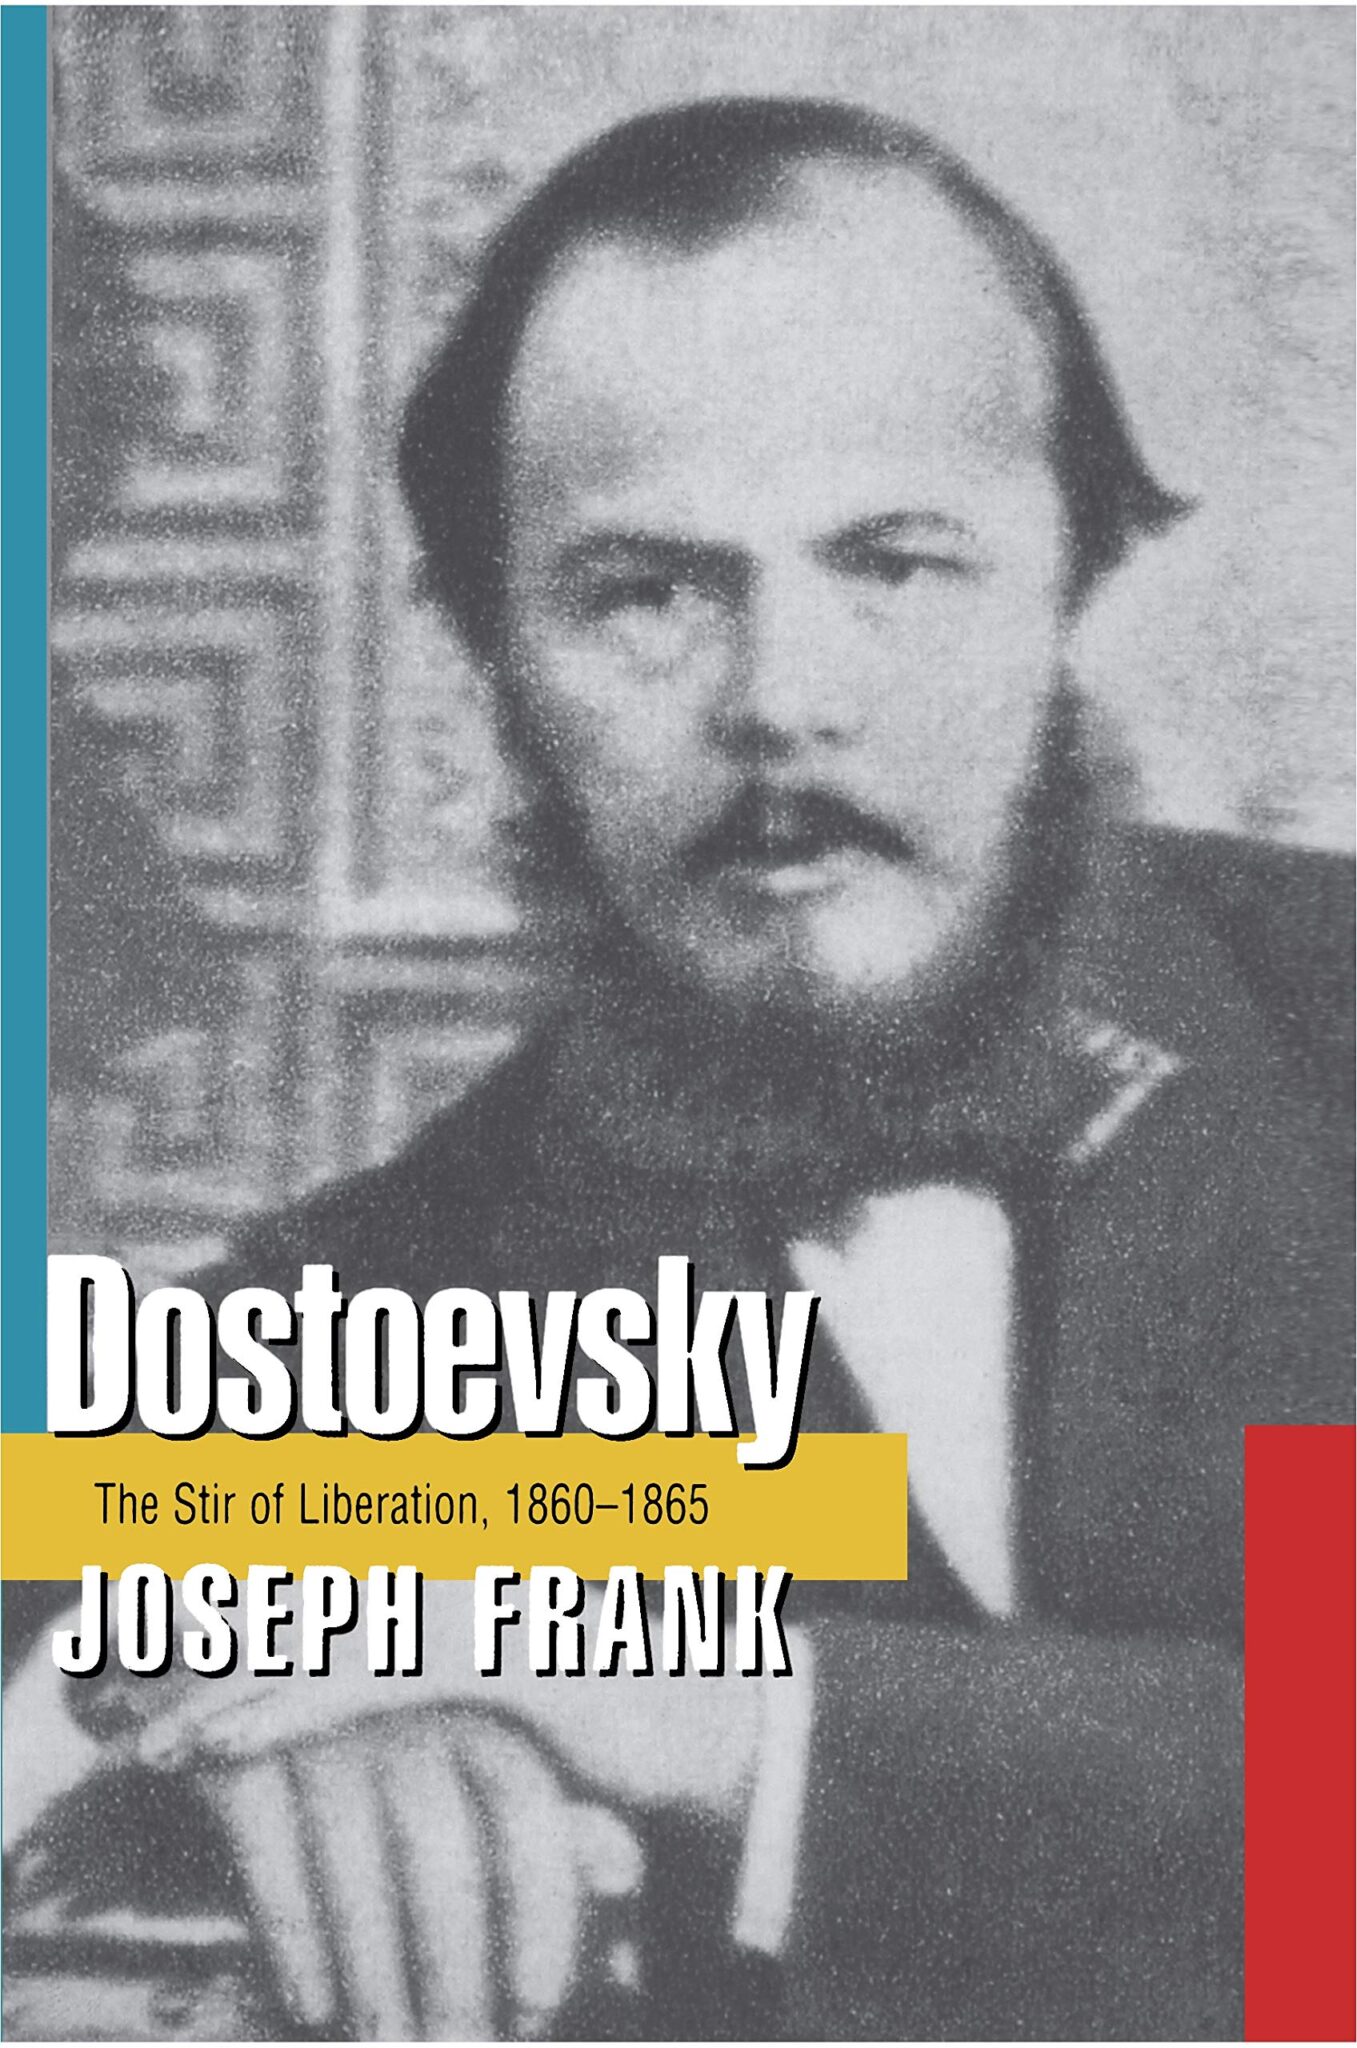 joseph frank lectures on dostoevsky